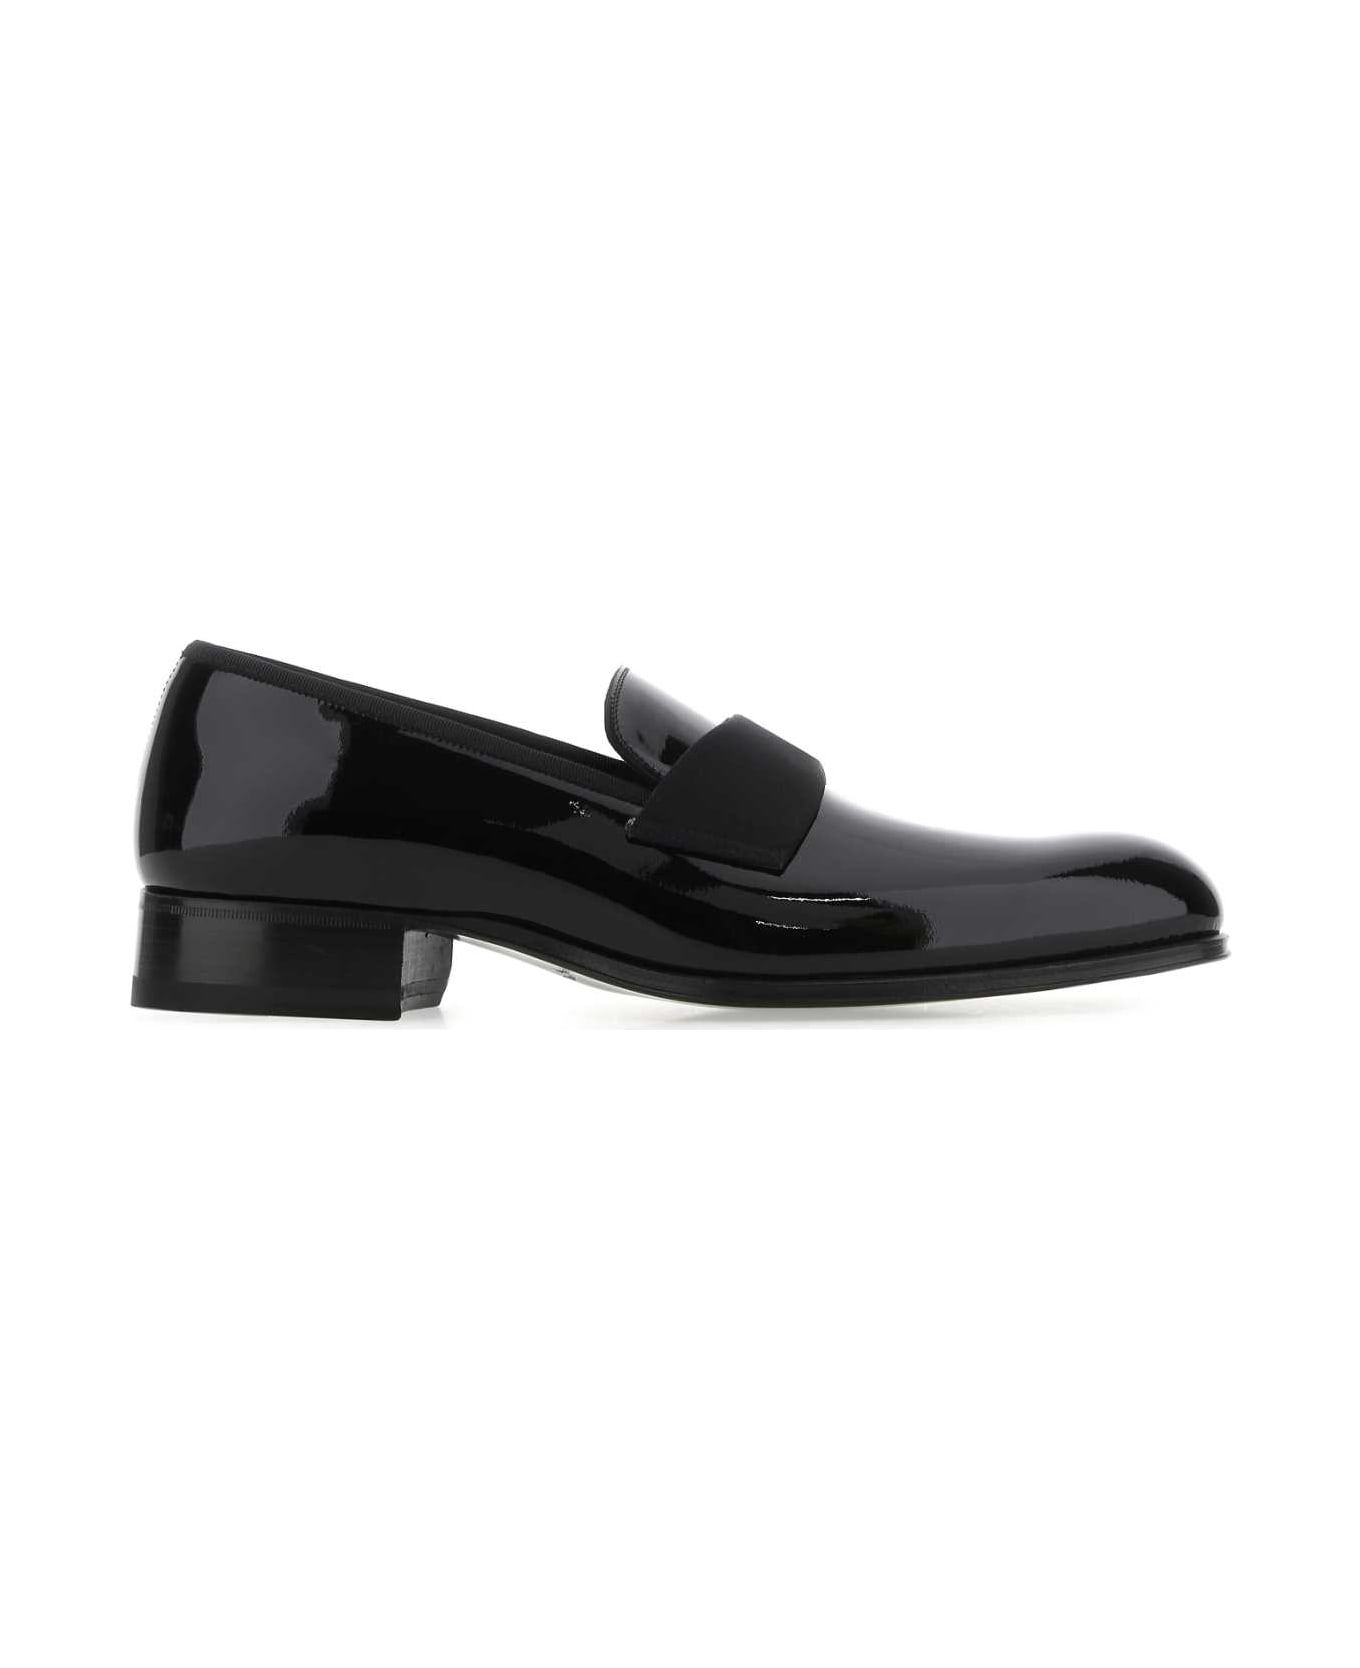 Tom Ford Black Leather Loafers - 1N001 ローファー＆デッキシューズ